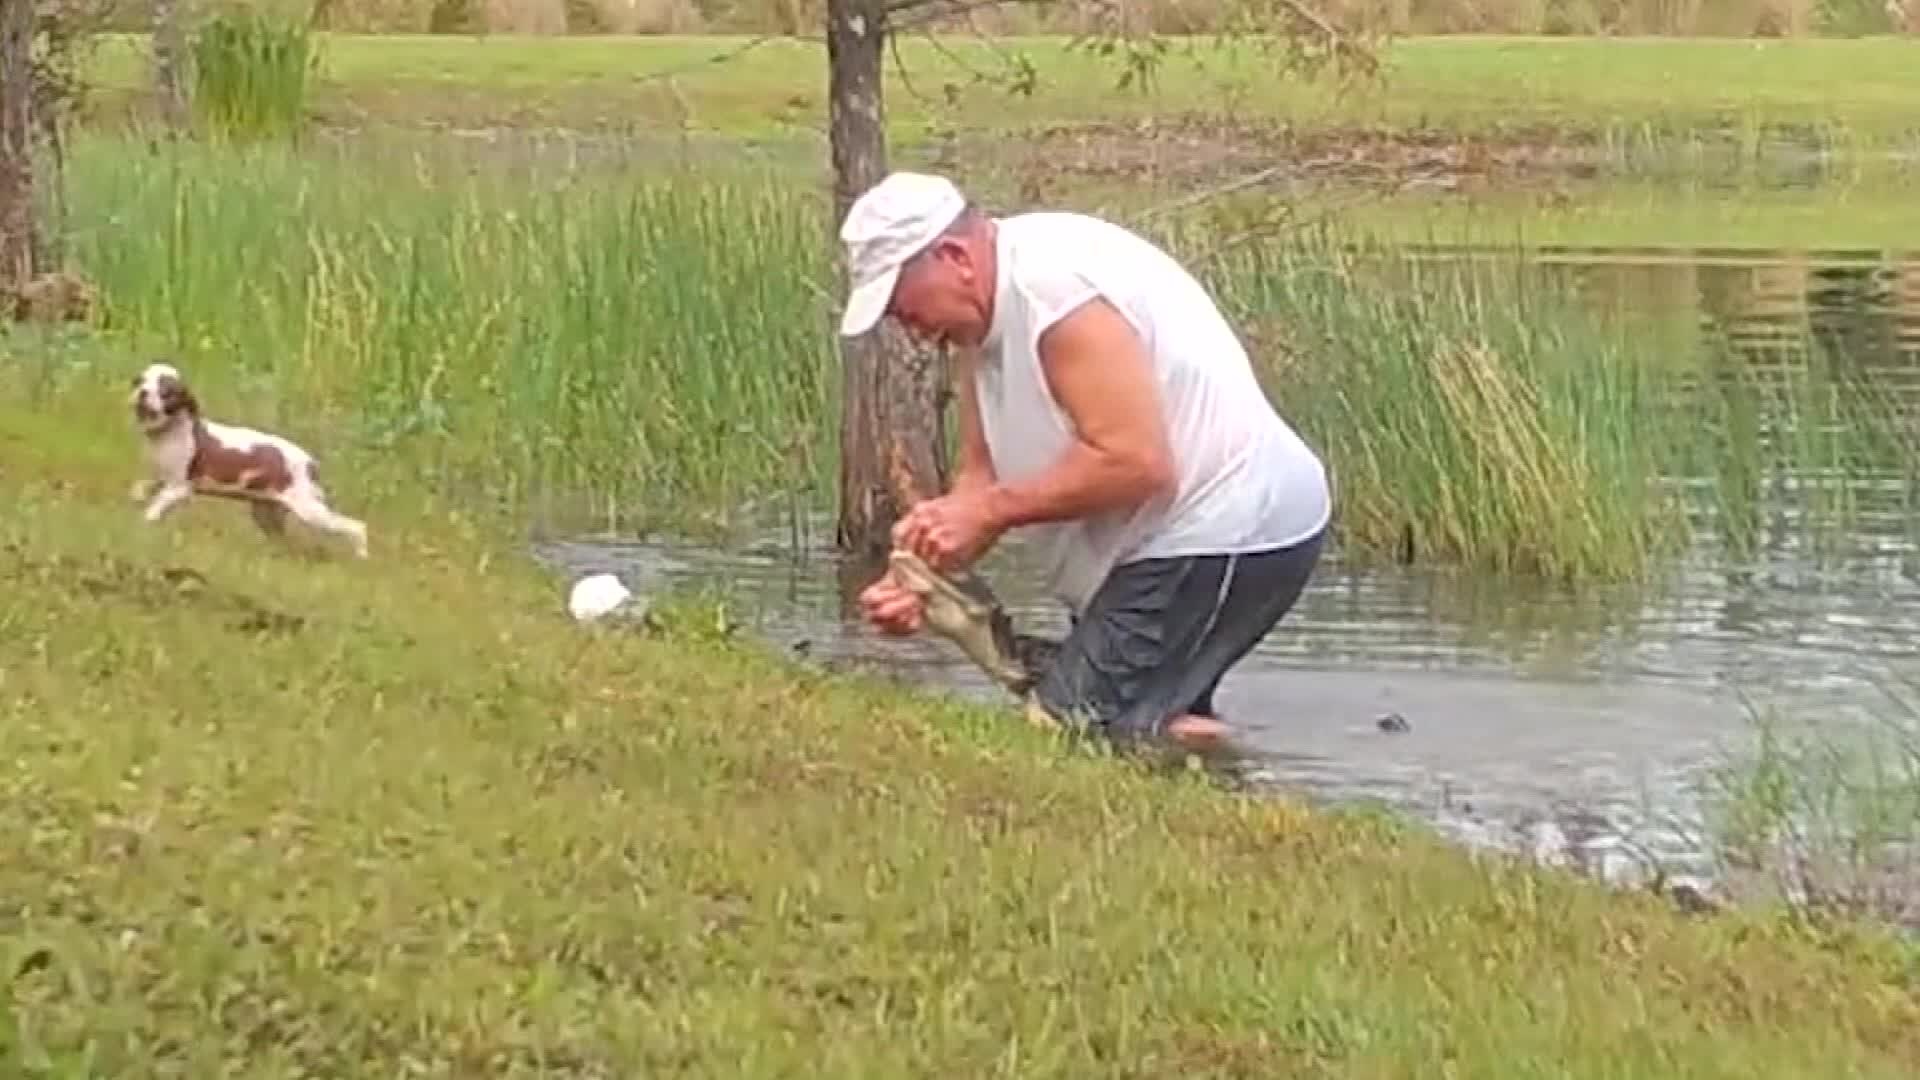 Florida Retiree Wrestles Puppy From Jaws of Alligator